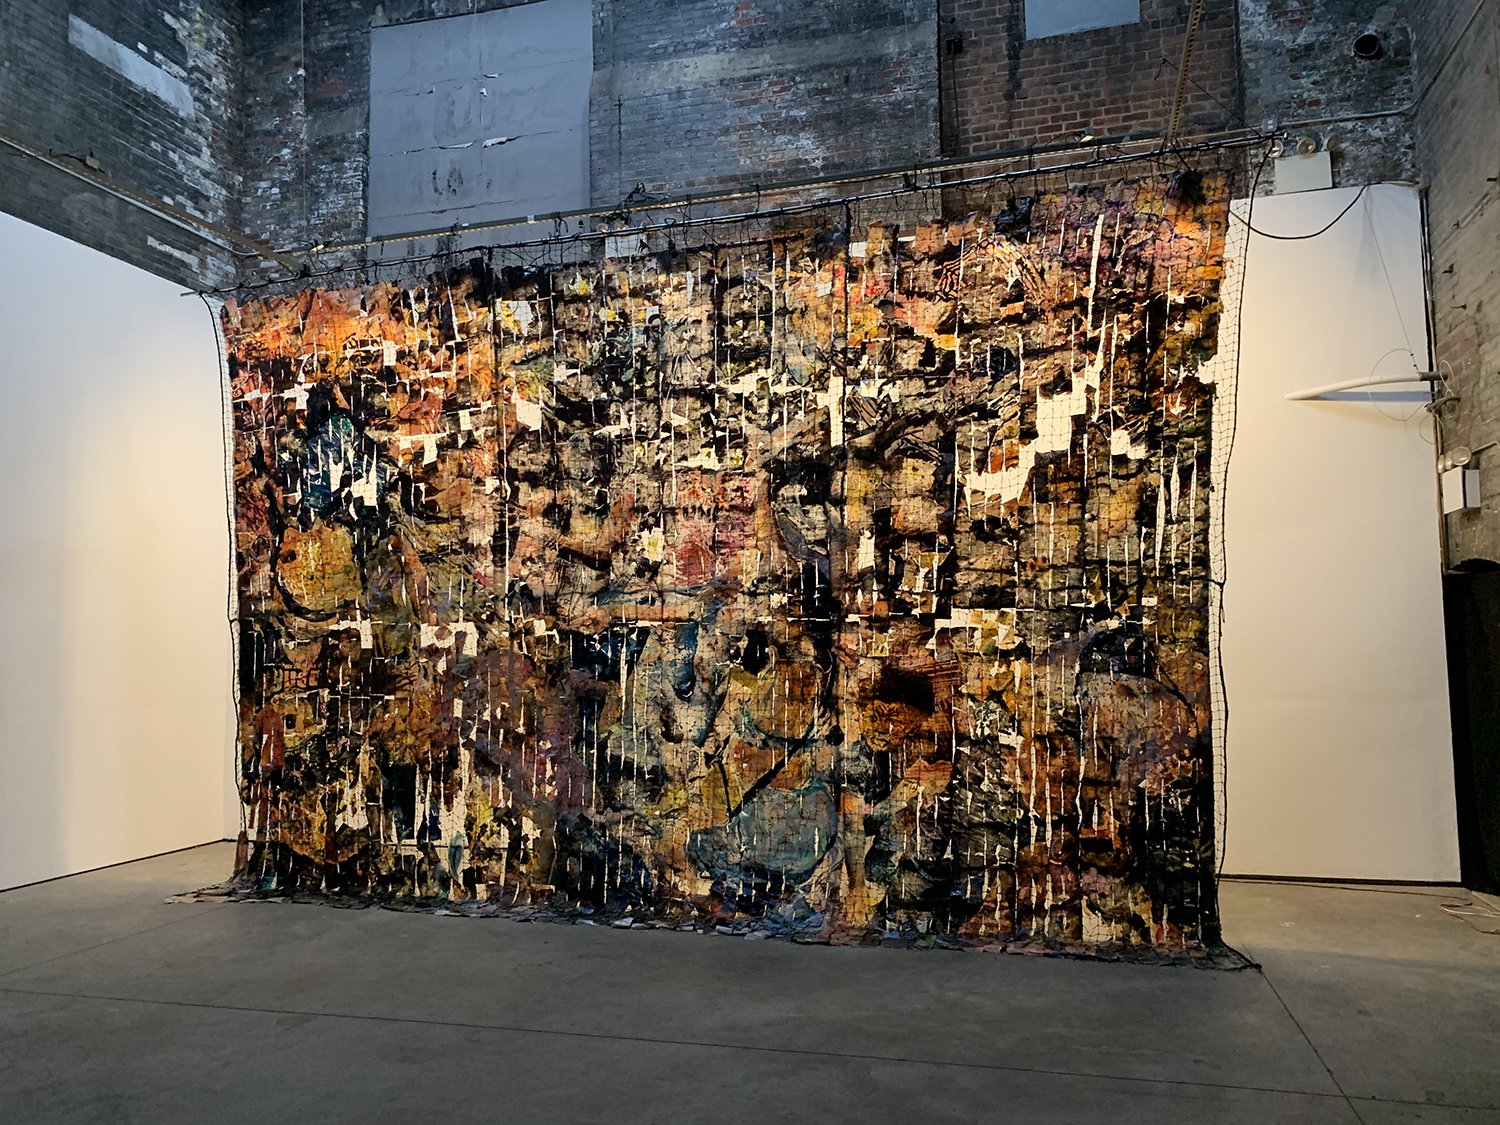 Baris Gokturk, All Saints, exhibition view at The Boiler @ ELM Foundation, 2021.Image transfer, polymer, ink, acrylic, netting, 487.7 x 731.52 cm (16 x 24 ft).Courtesy of the artist and The Boiler @ ELM Foundation.